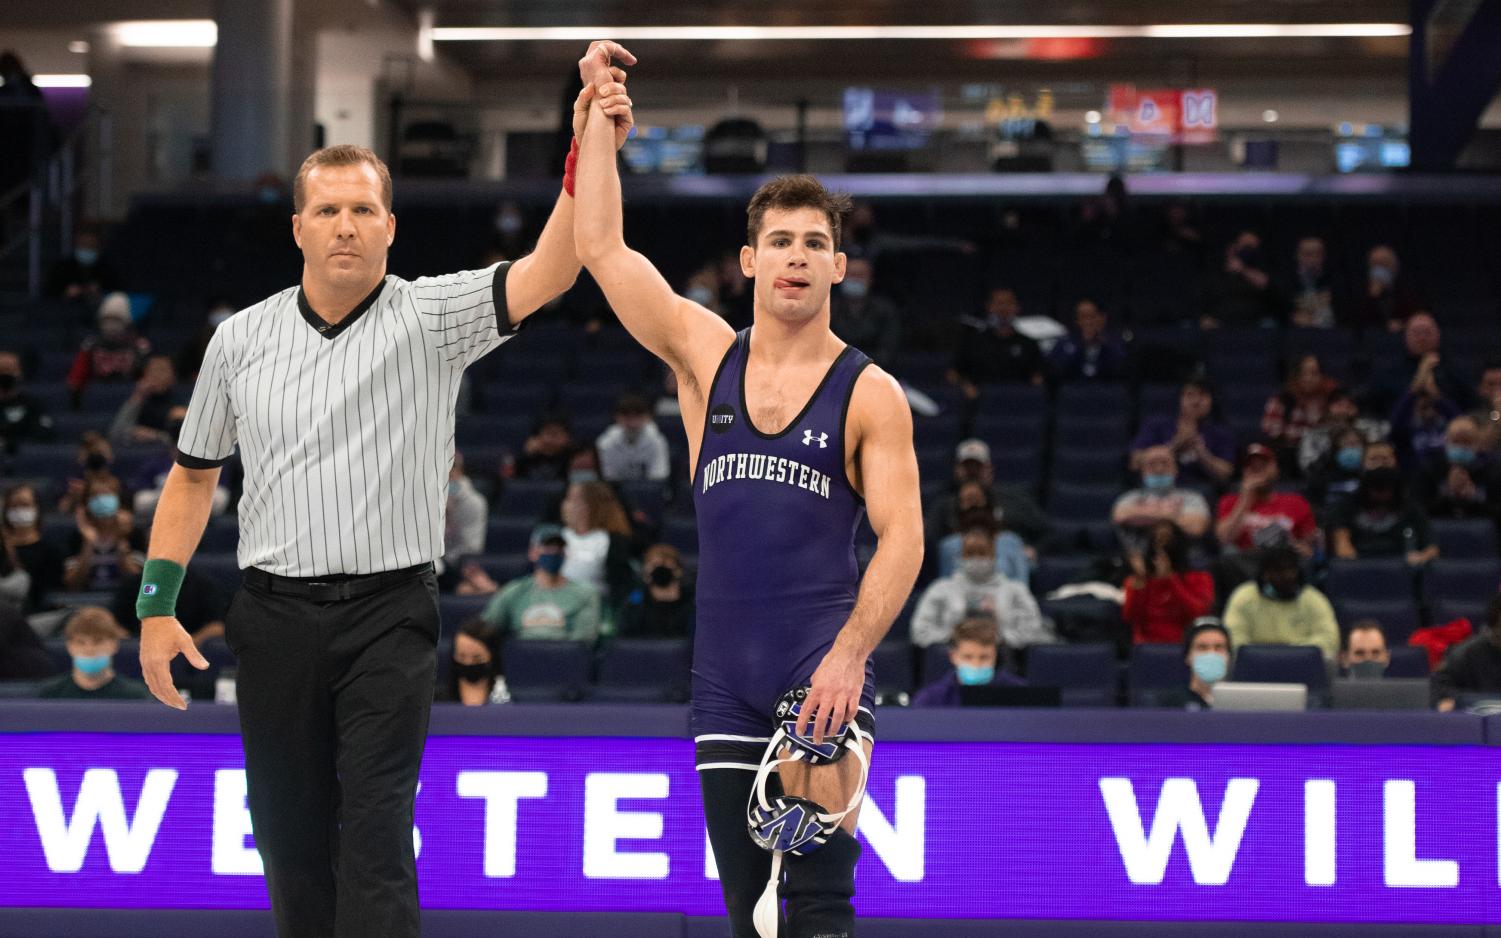 Referee+wearing+black+and+white+striped+shirt+holds+up+the+hand+of+man+in+a+purple+singlet+who+sticks+his+tongue+out.